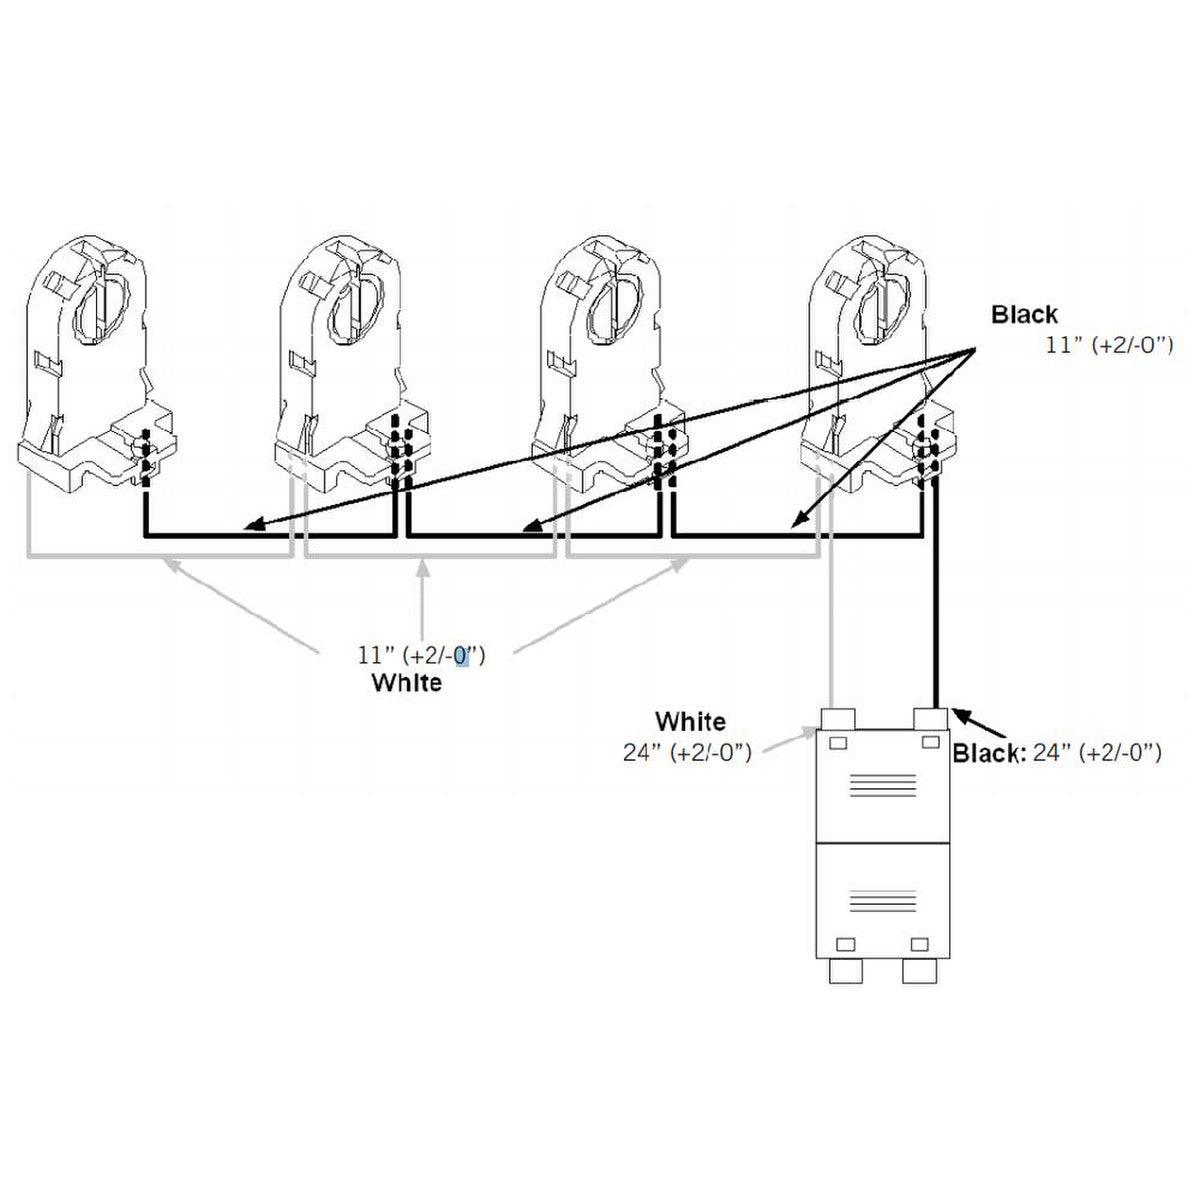 4-Lamp Wiring Harness with Tall Non-shunted Sockets for LED Tubes